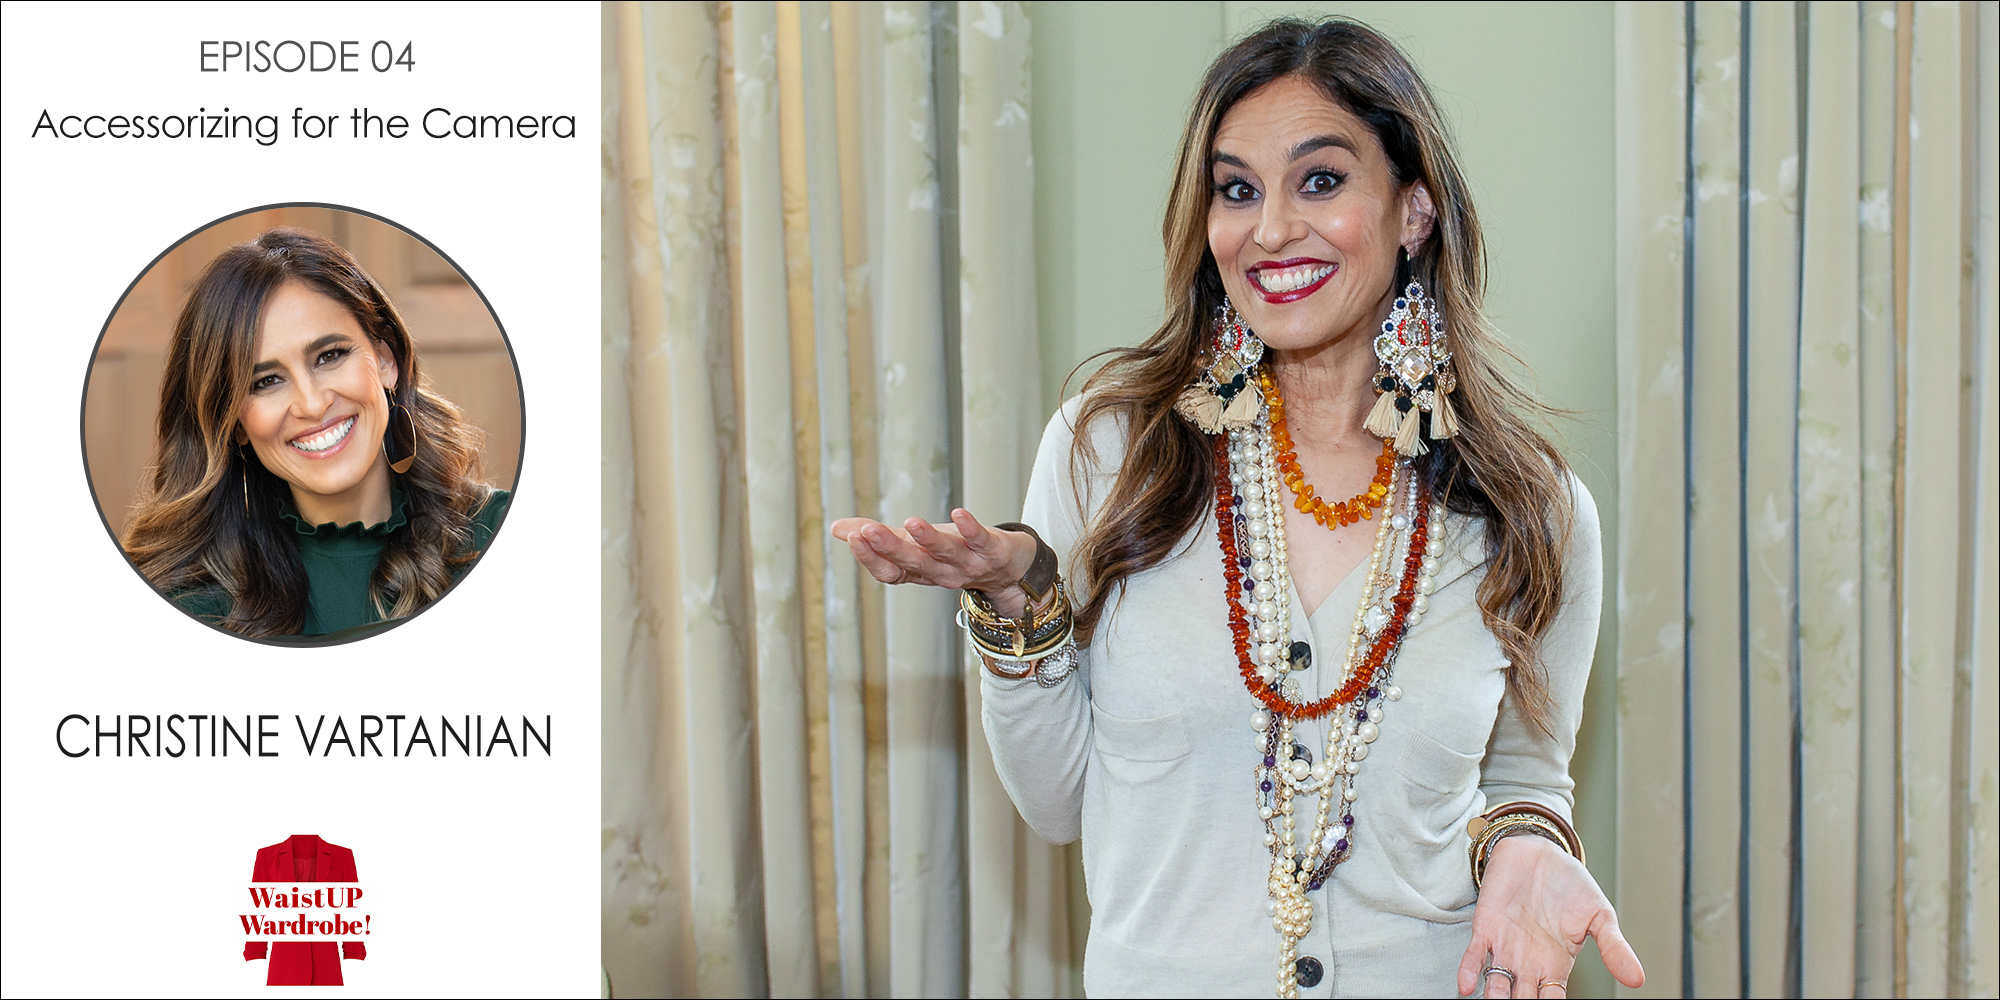 Christine Vartanian standing in front of plain ivory curtains wearing a large amount of layered necklaces, multiple bracelets and large tassel earrings for a podcast on accessorizing for the camera